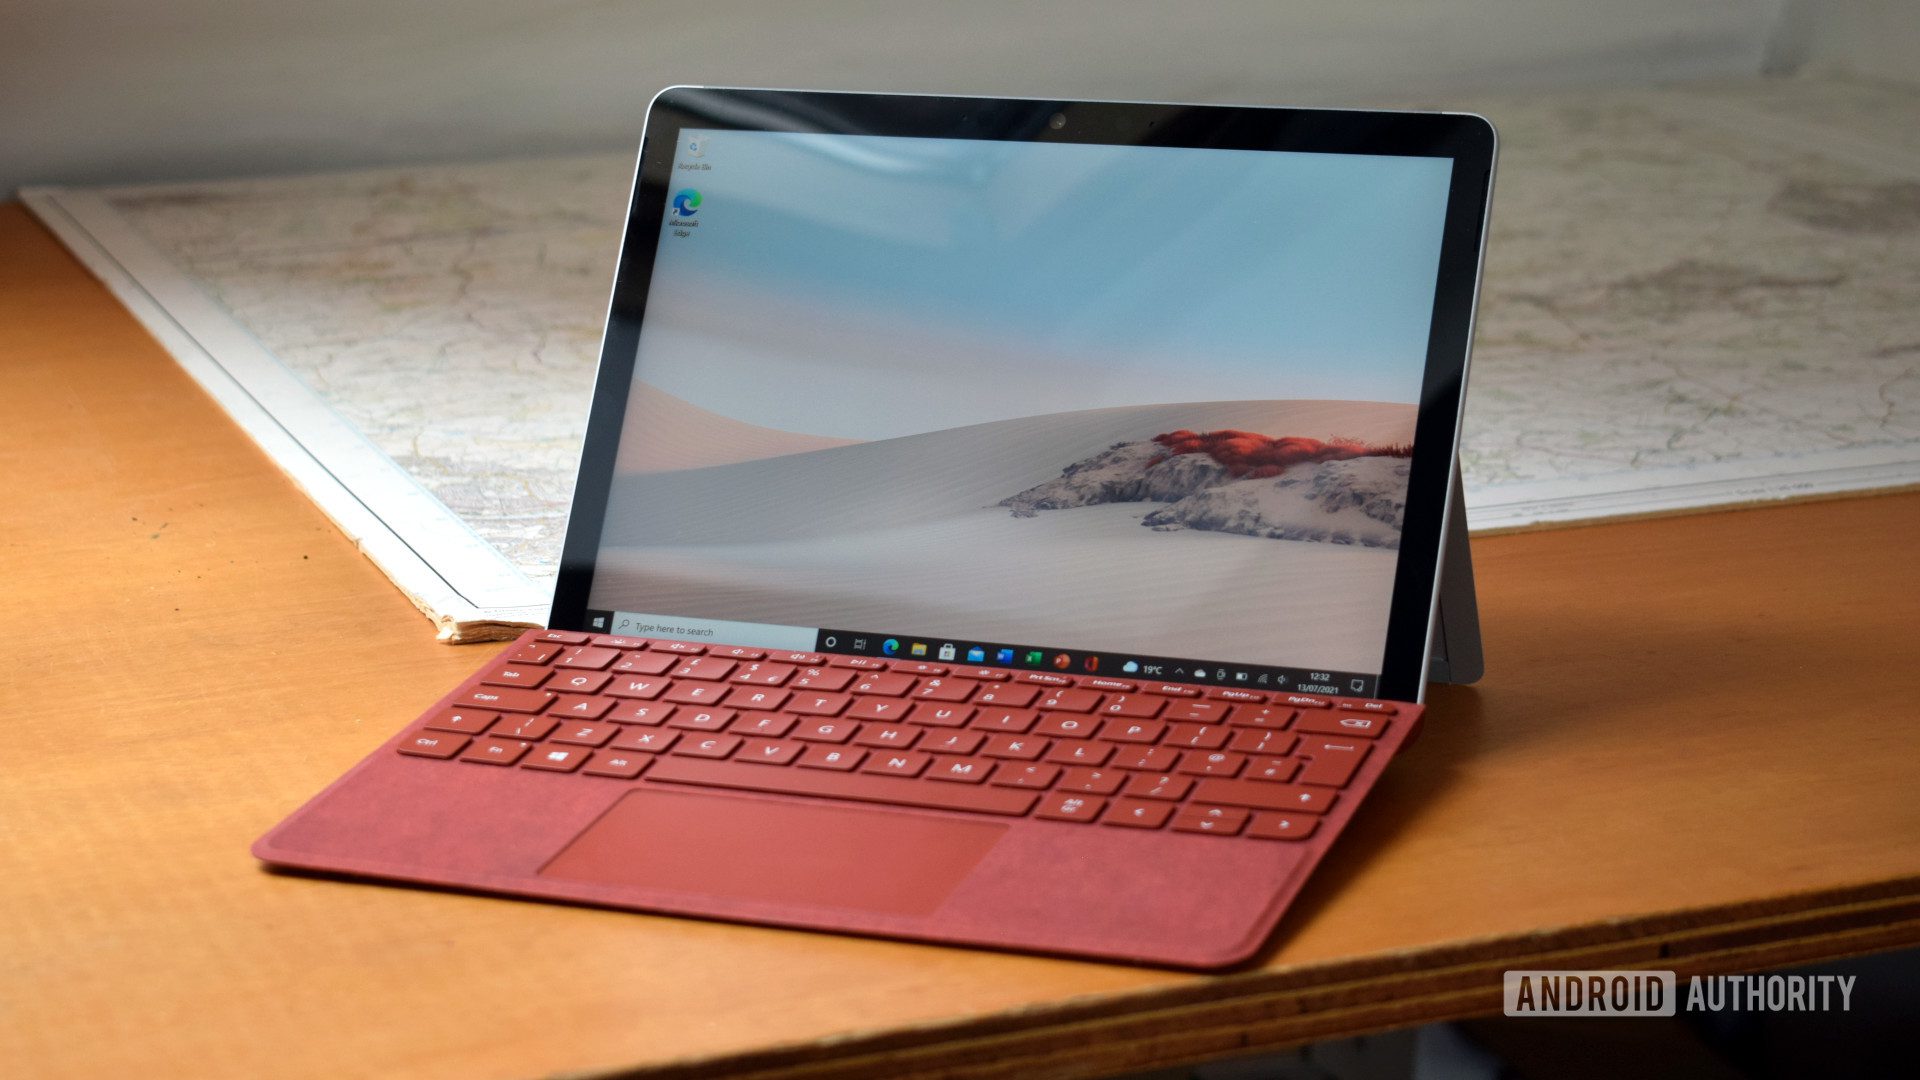 Microsoft AI-focused laptops could be announced on May 20